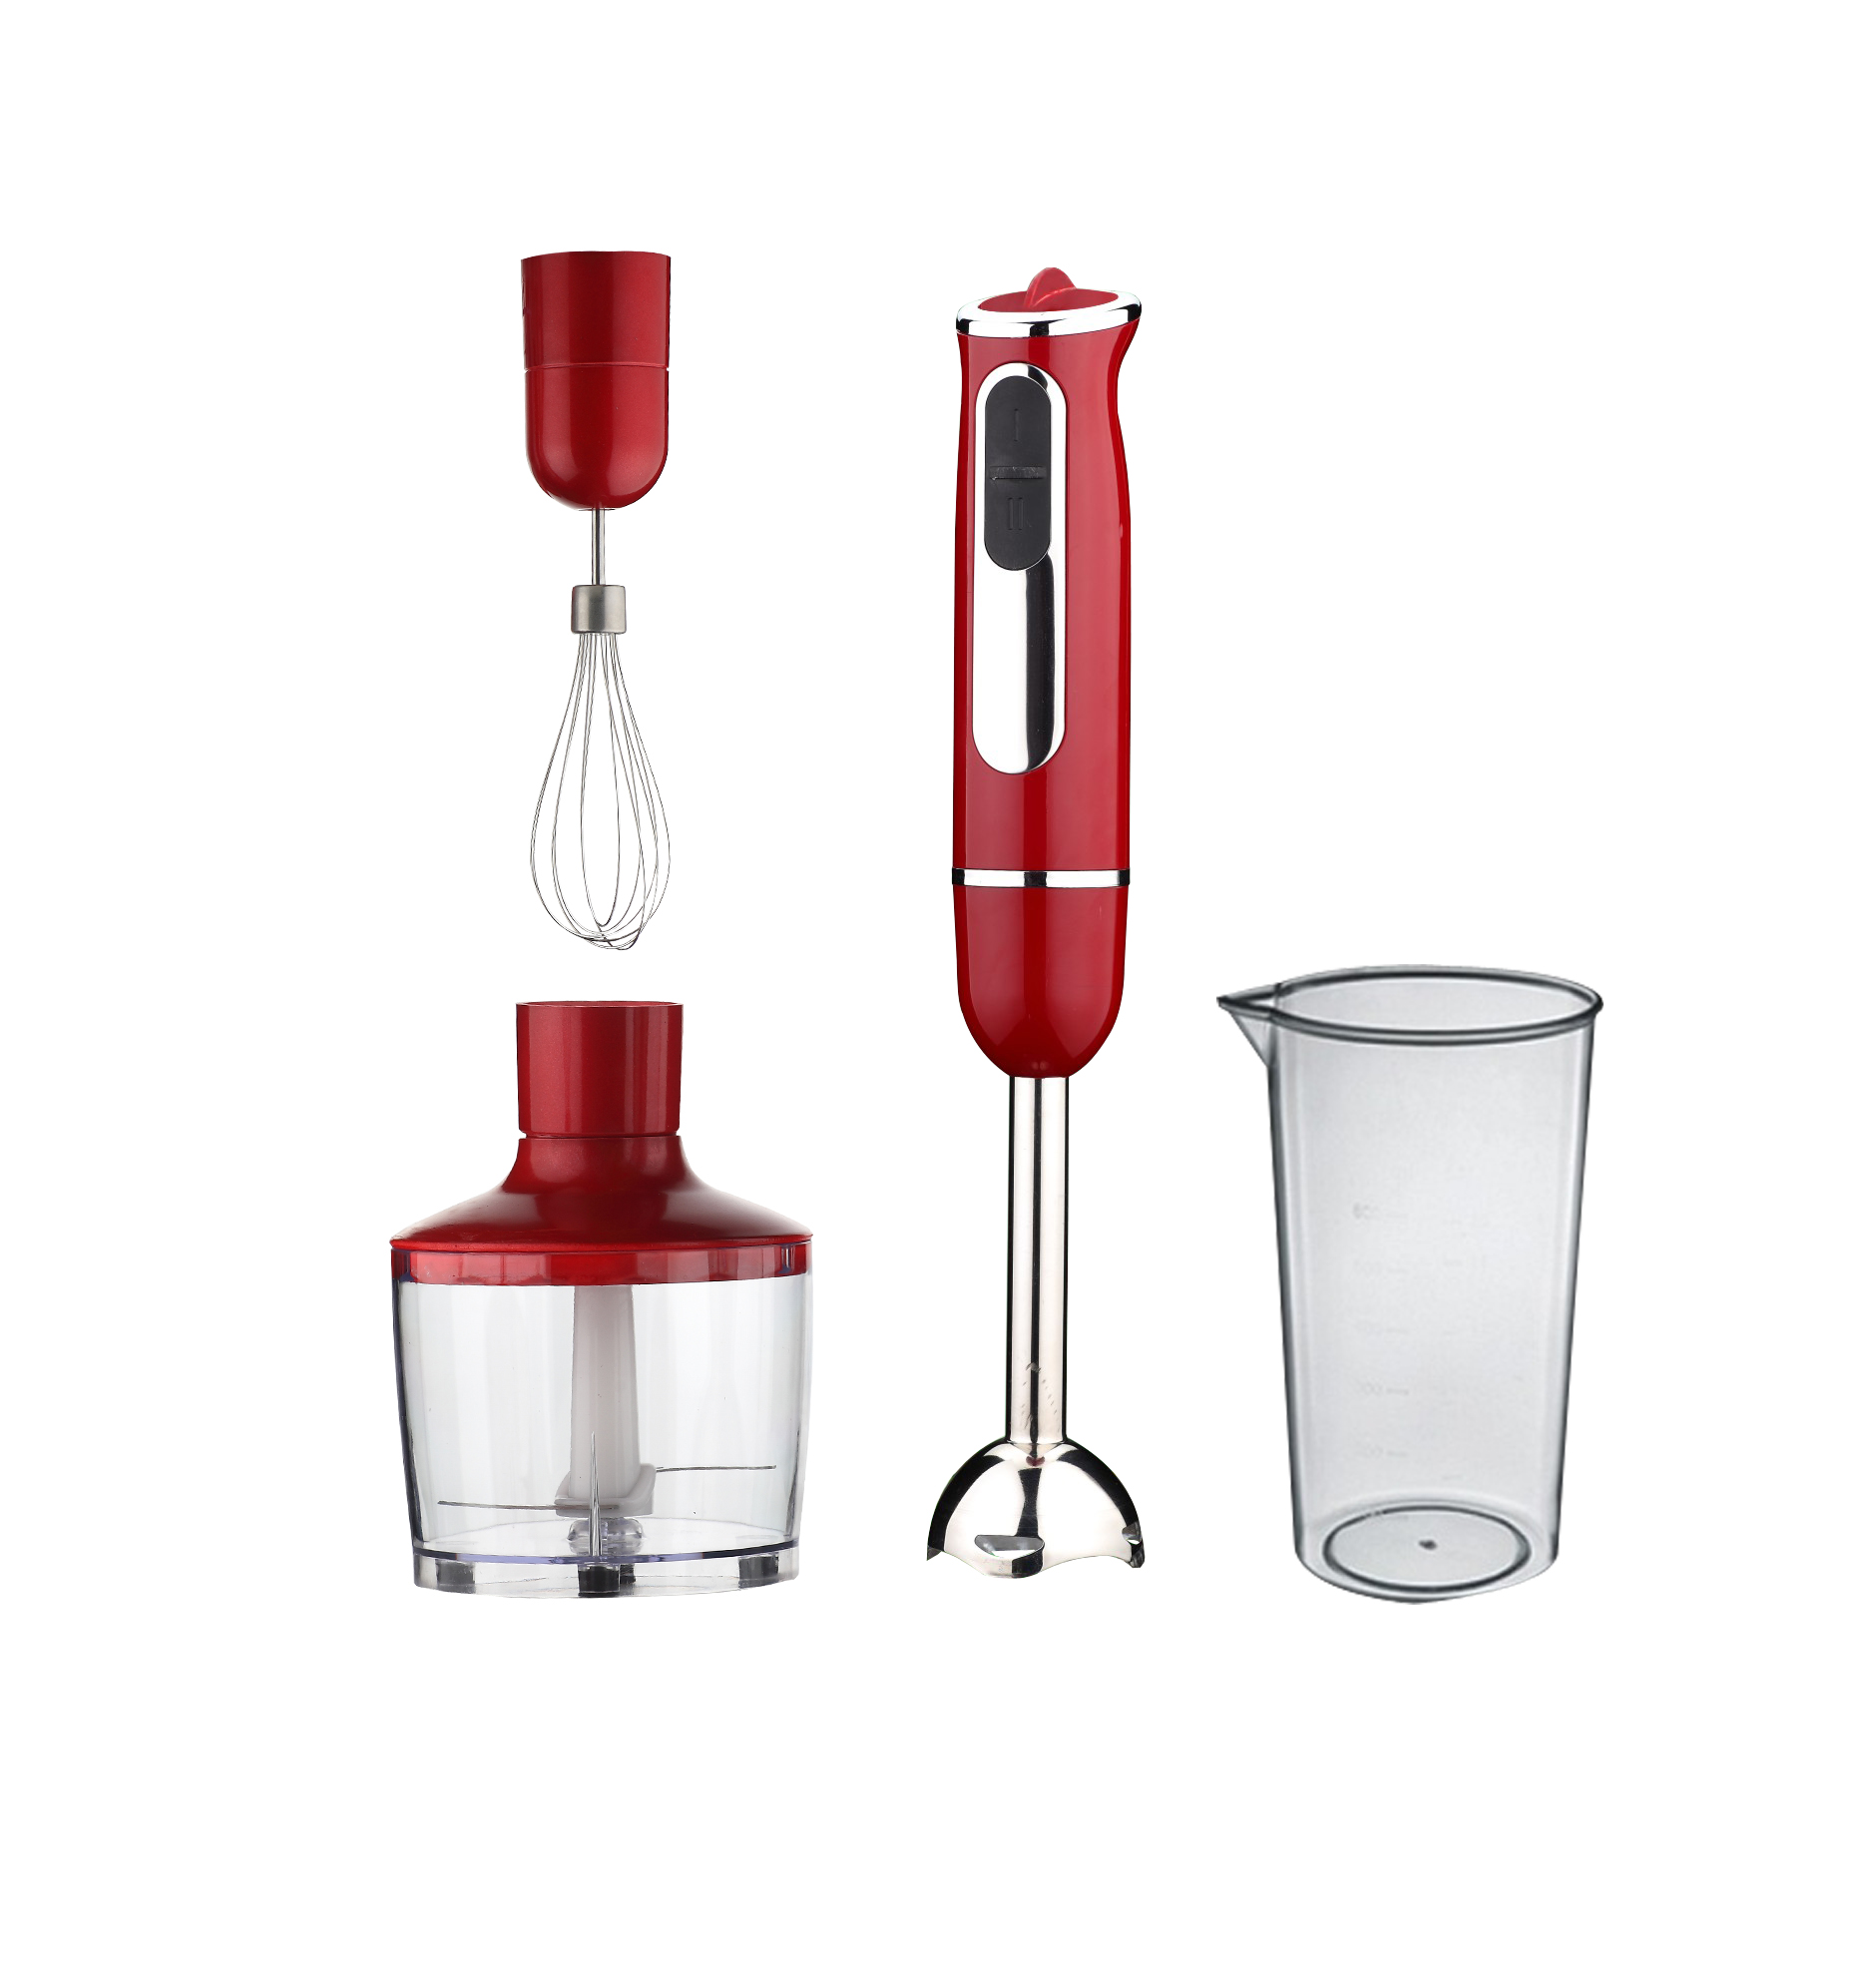 3 in 1 funtion household vegetable hand blender parts